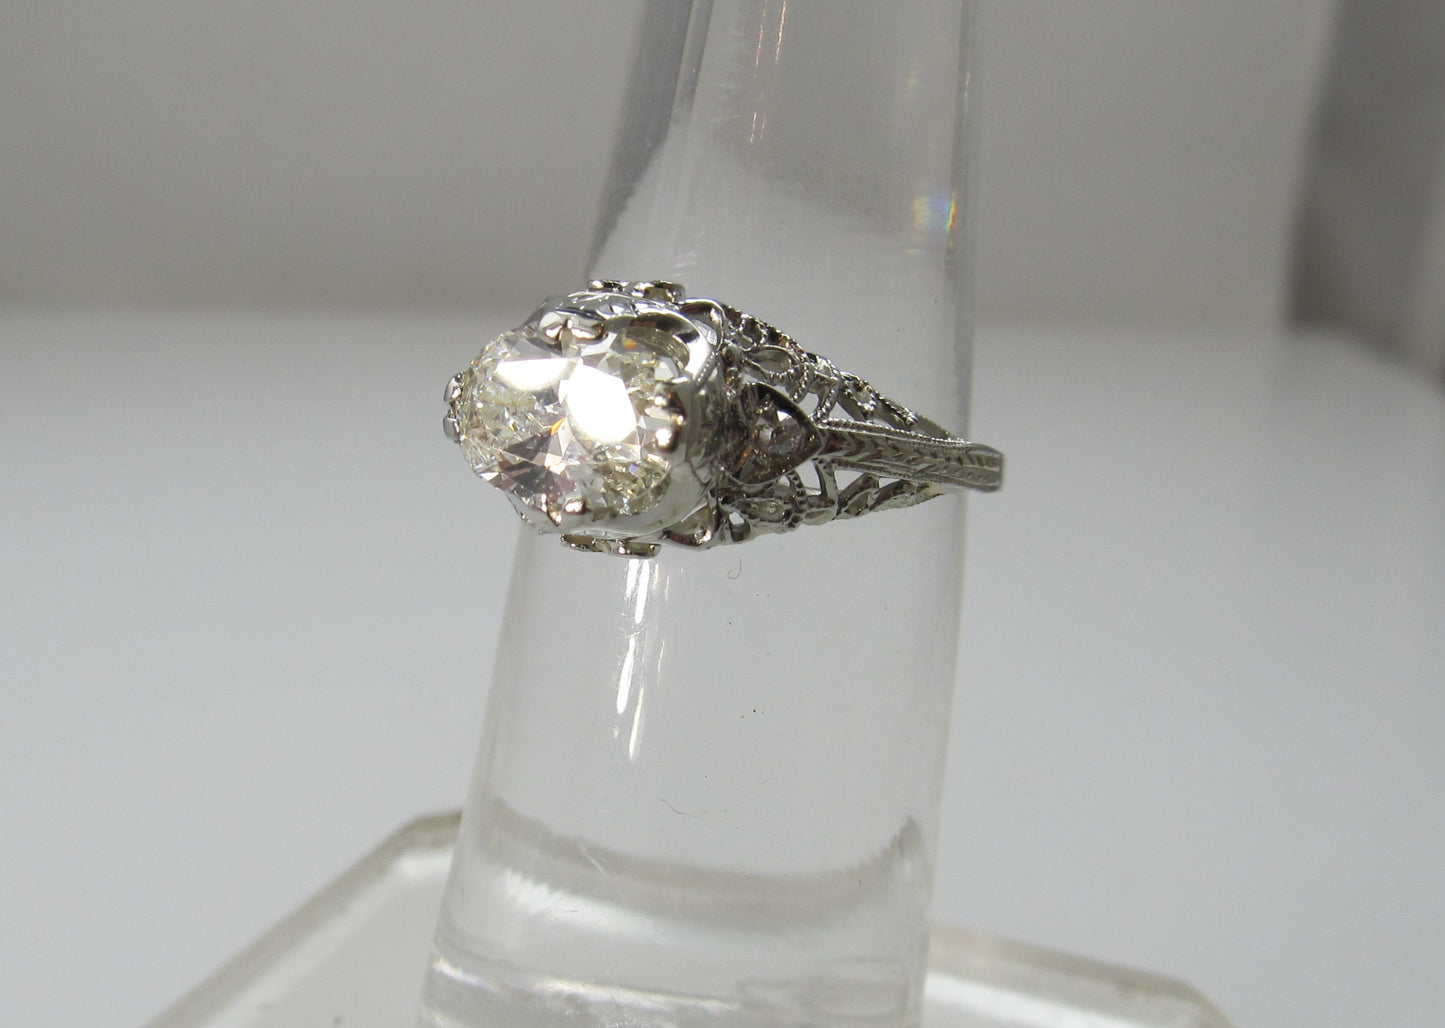 18k White Gold Filigree Ring With A 1.21ct Oval Cut Diamond, Circa 1920